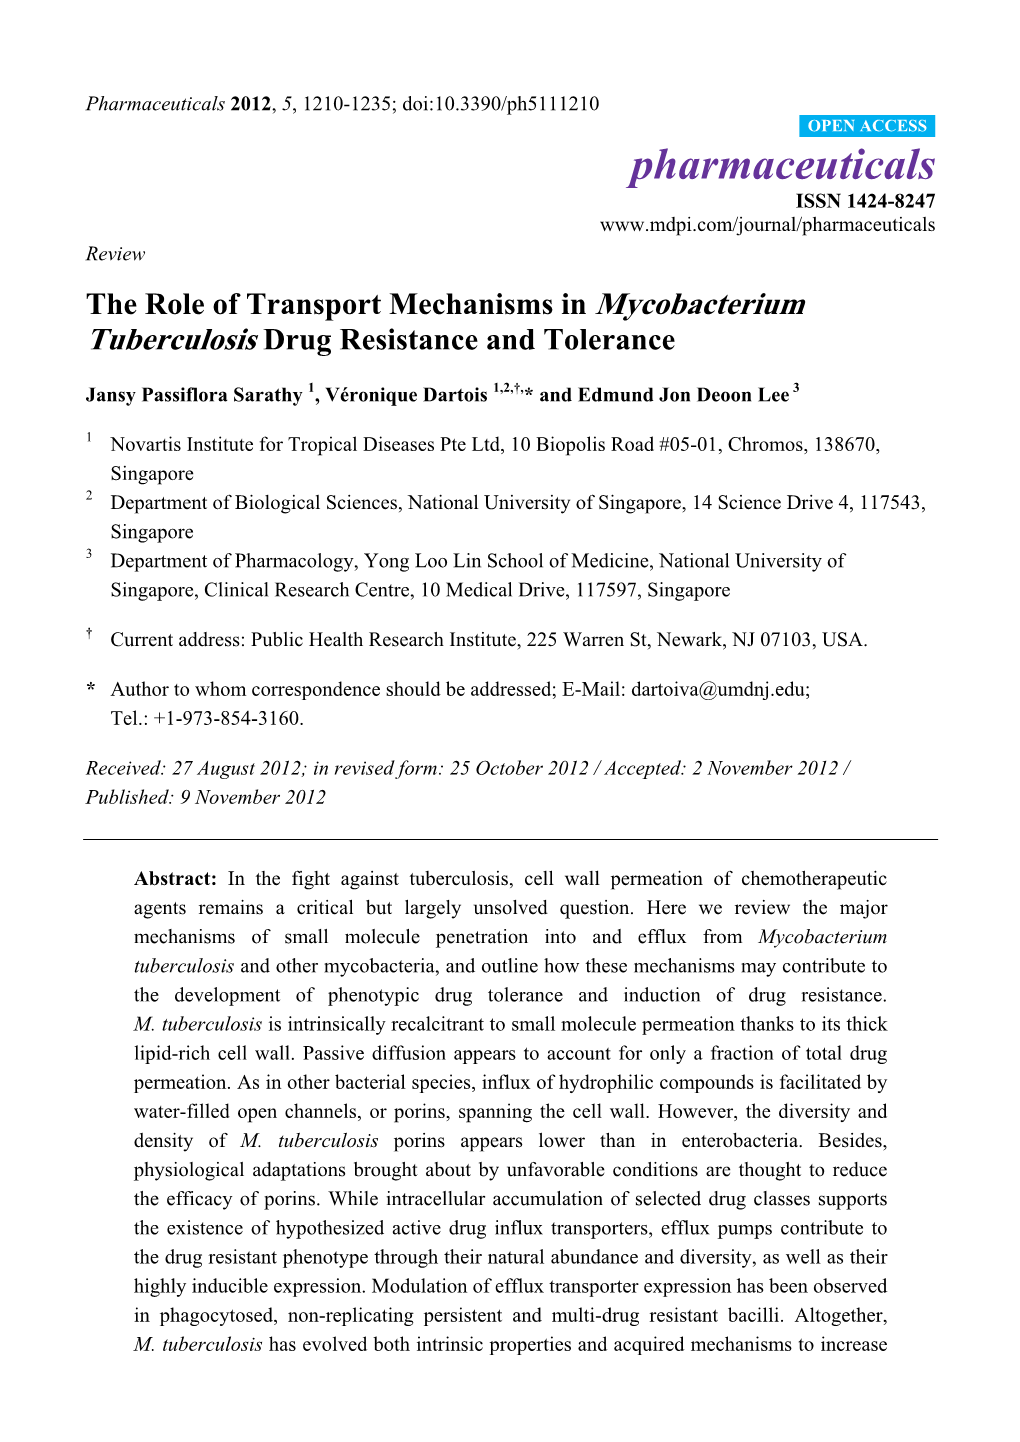 The Role of Transport Mechanisms in Mycobacterium Tuberculosis Drug Resistance and Tolerance